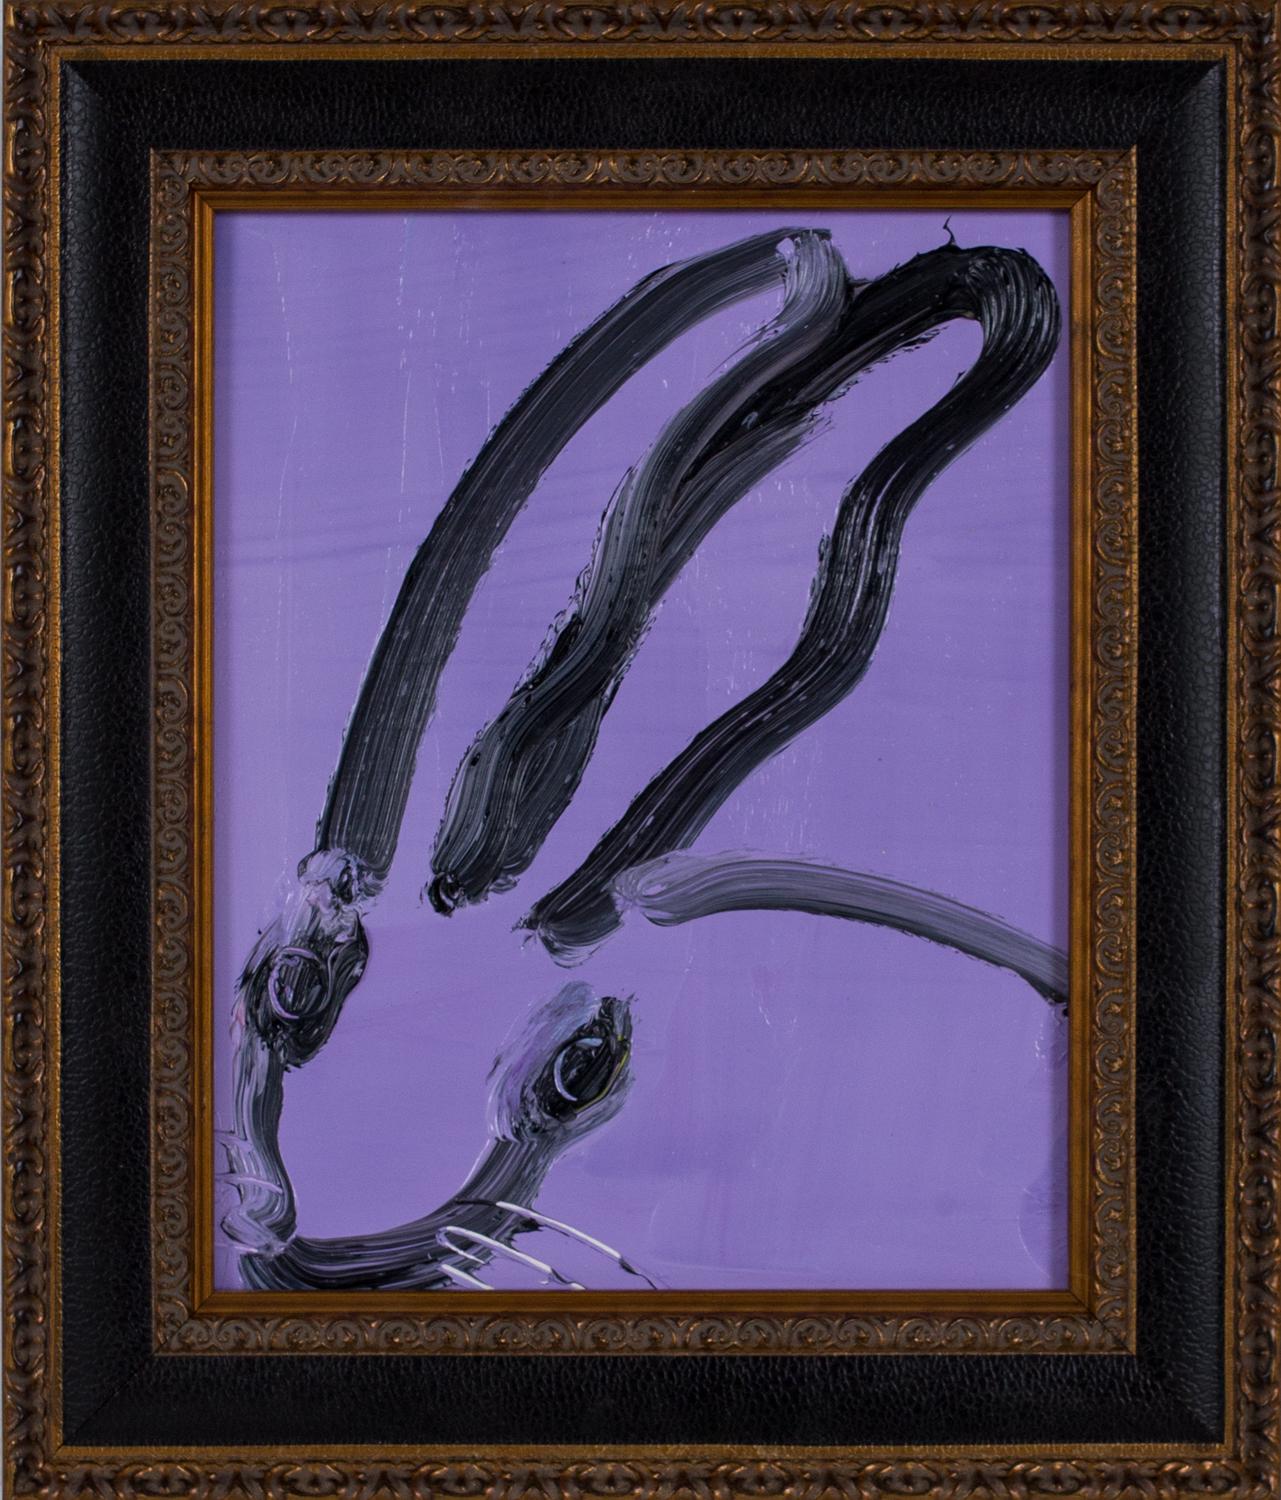 Hunt Slonem "Untitled" Purple Bunny
Black gestured bunny on a purple background in an antique frame

Unframed: 10 x 8 inches  
Framed: 14 x 12 inches
*Painting is framed - Please note that not all Hunt Slonem frames are not in mint condition. There